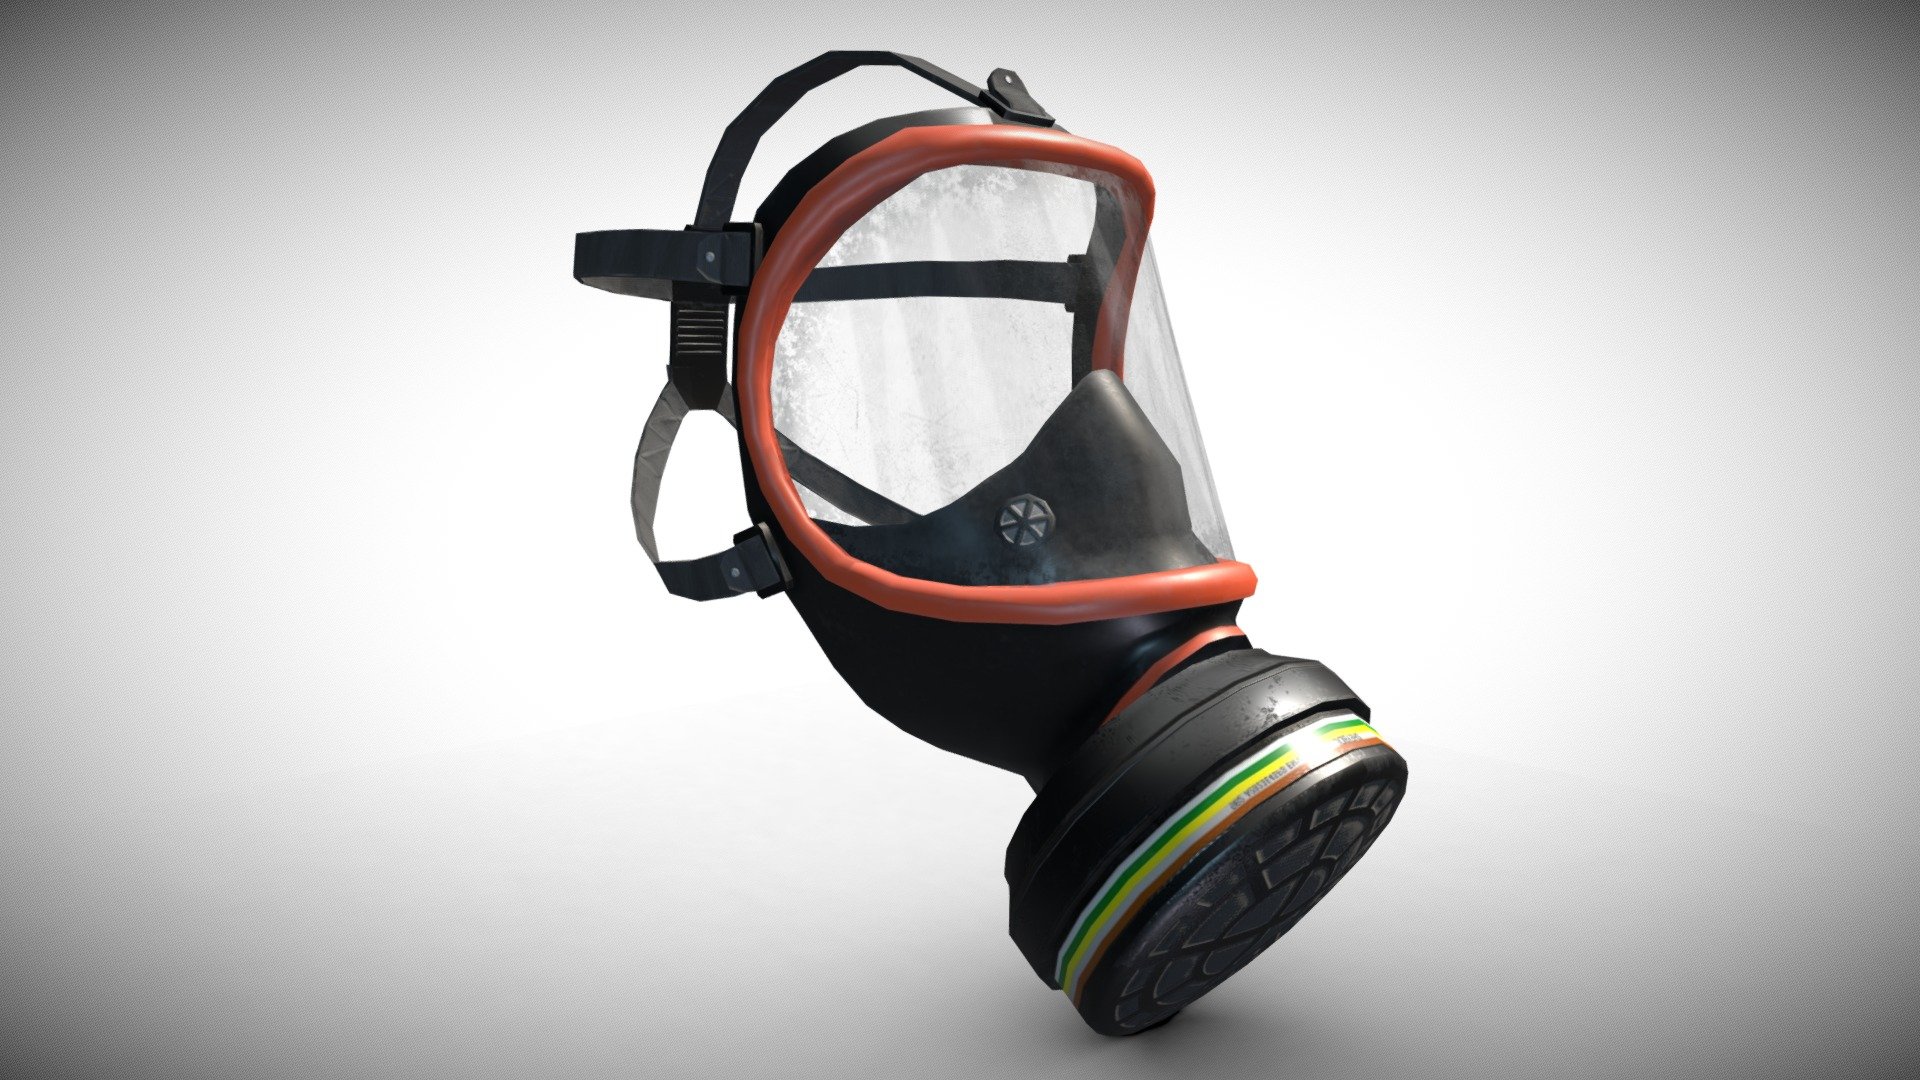 Gas Mask / air mask made using the PBR workflow
Game ready model
VR AR Optimized
Homologated filter colors texture - Gas Mask - 3D model by iShoNz (@Jonabafor) 3d model